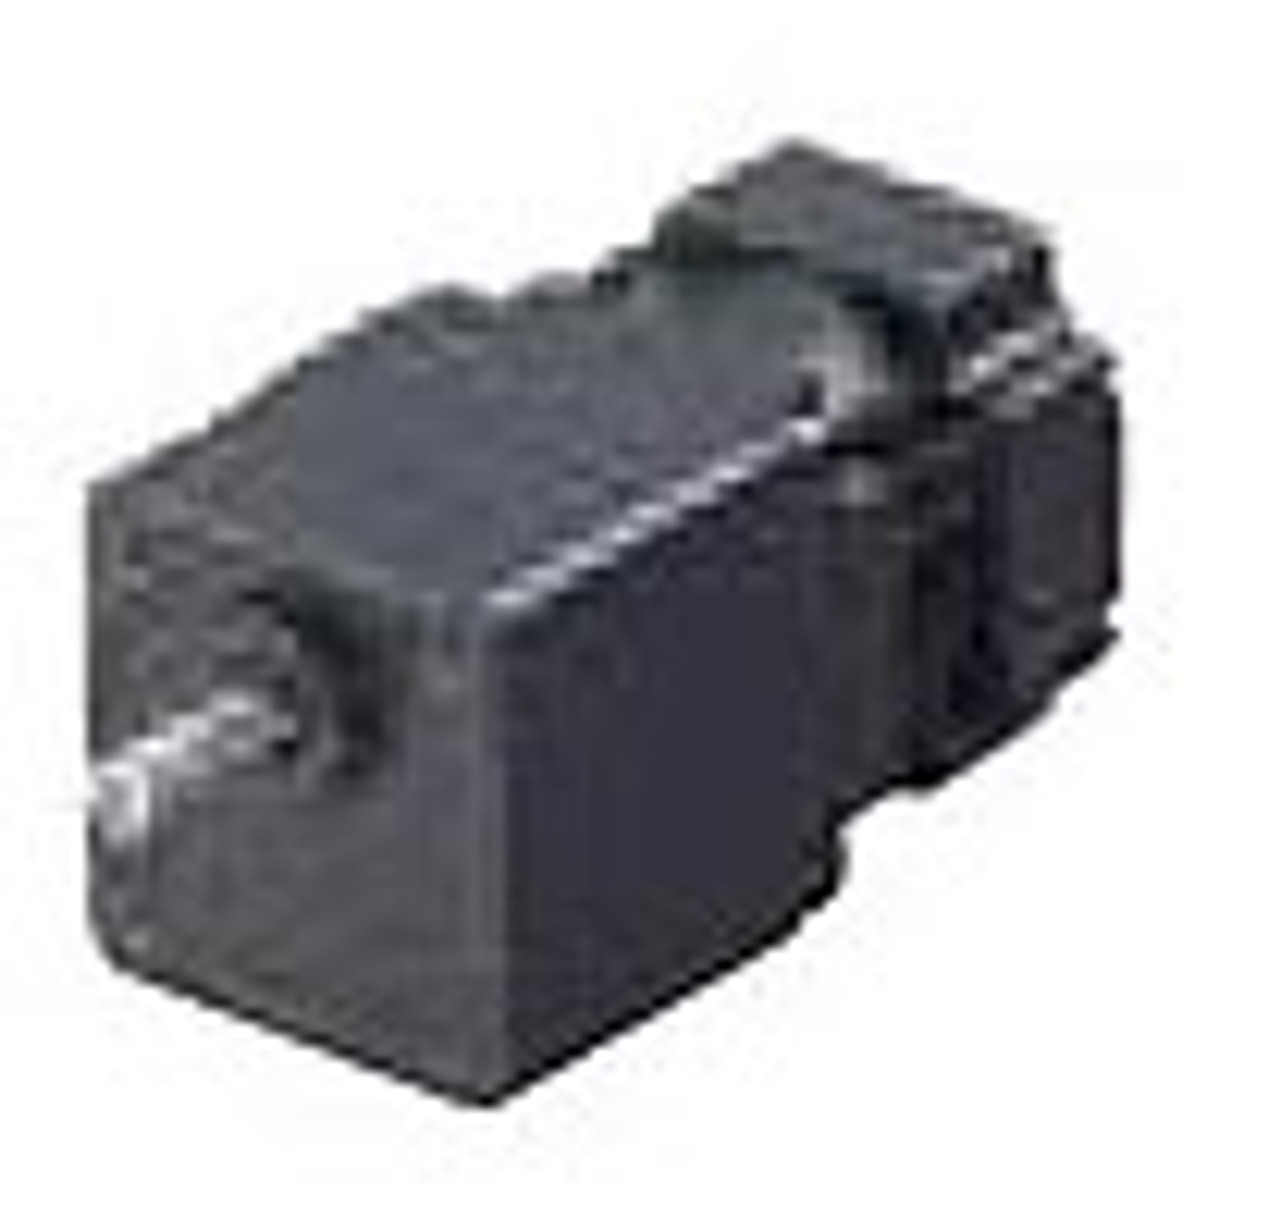 BLHM015K-20 - Product Image